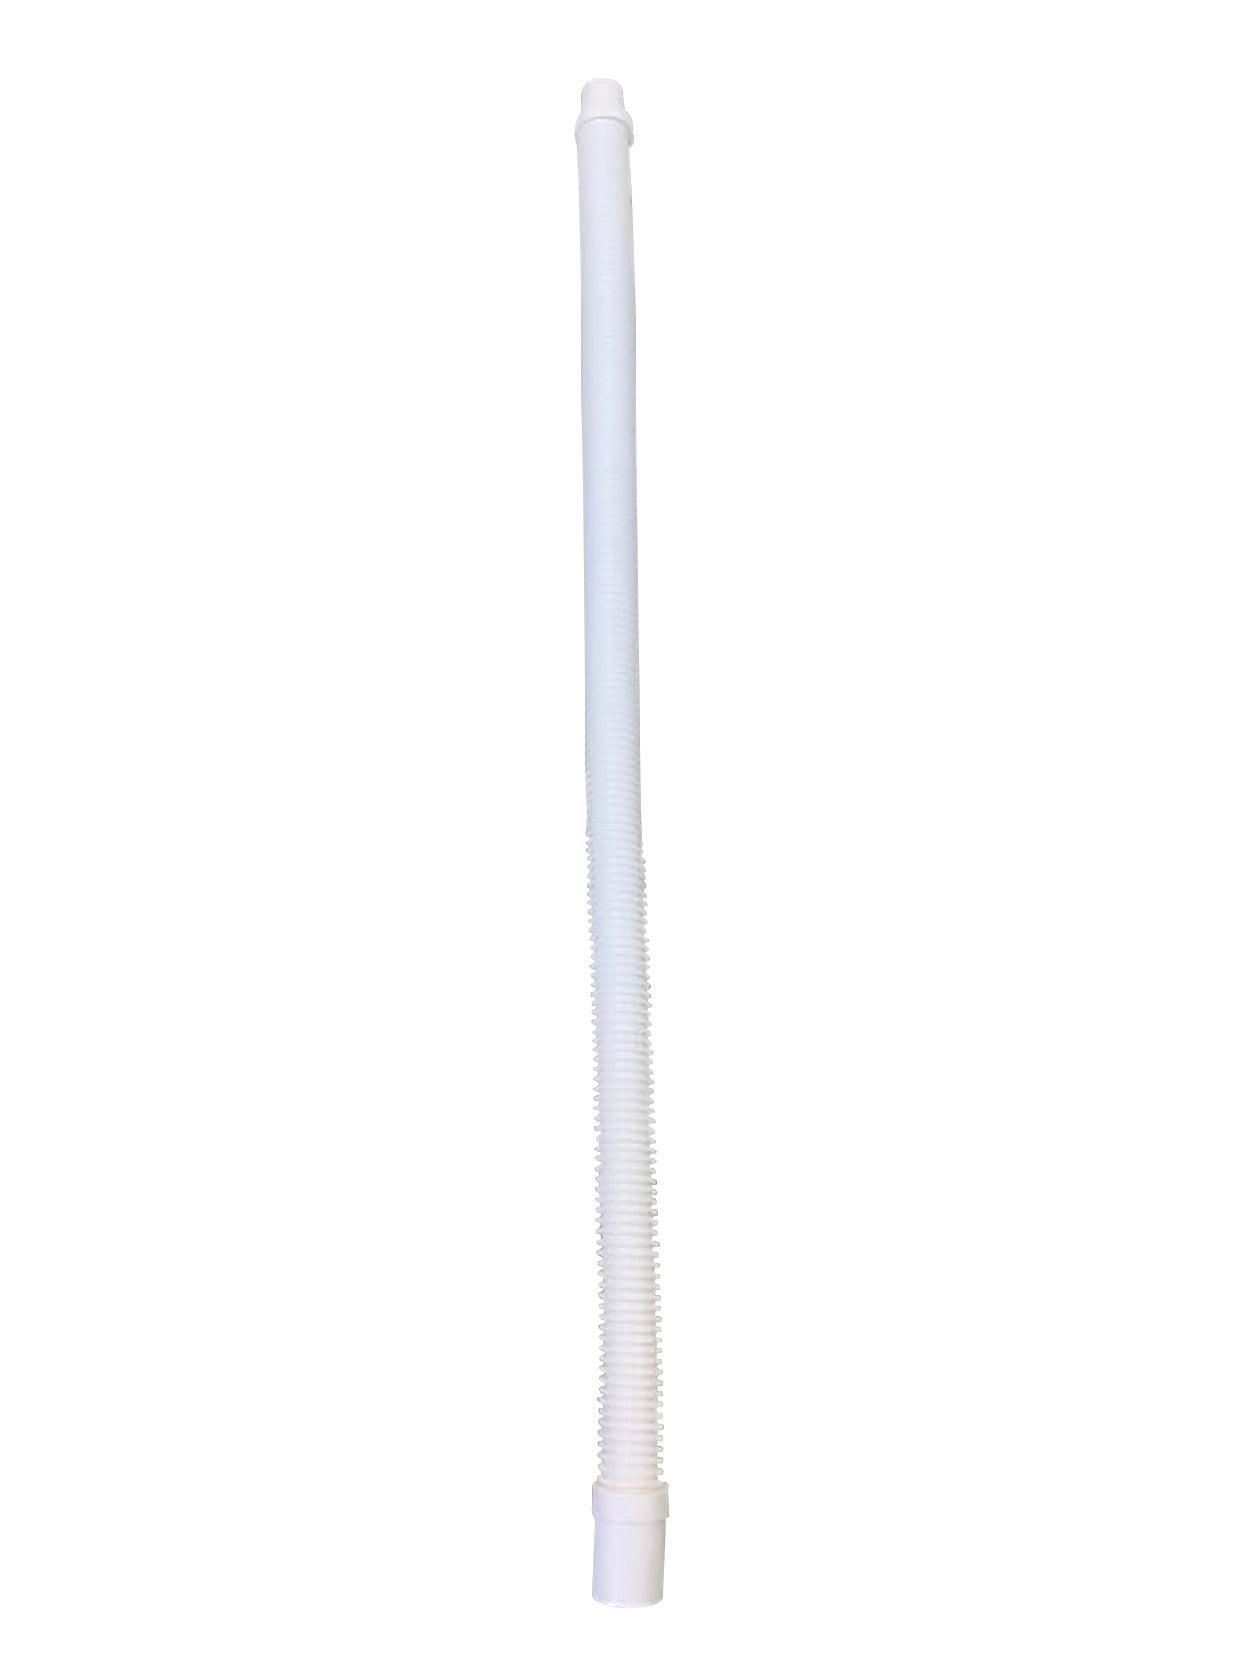 48" White Universal Suction Cleaner Leader Hose - PS485 - Suction Cleaner Leader Hose - POOLSTYLE - The Pool Supply Warehouse